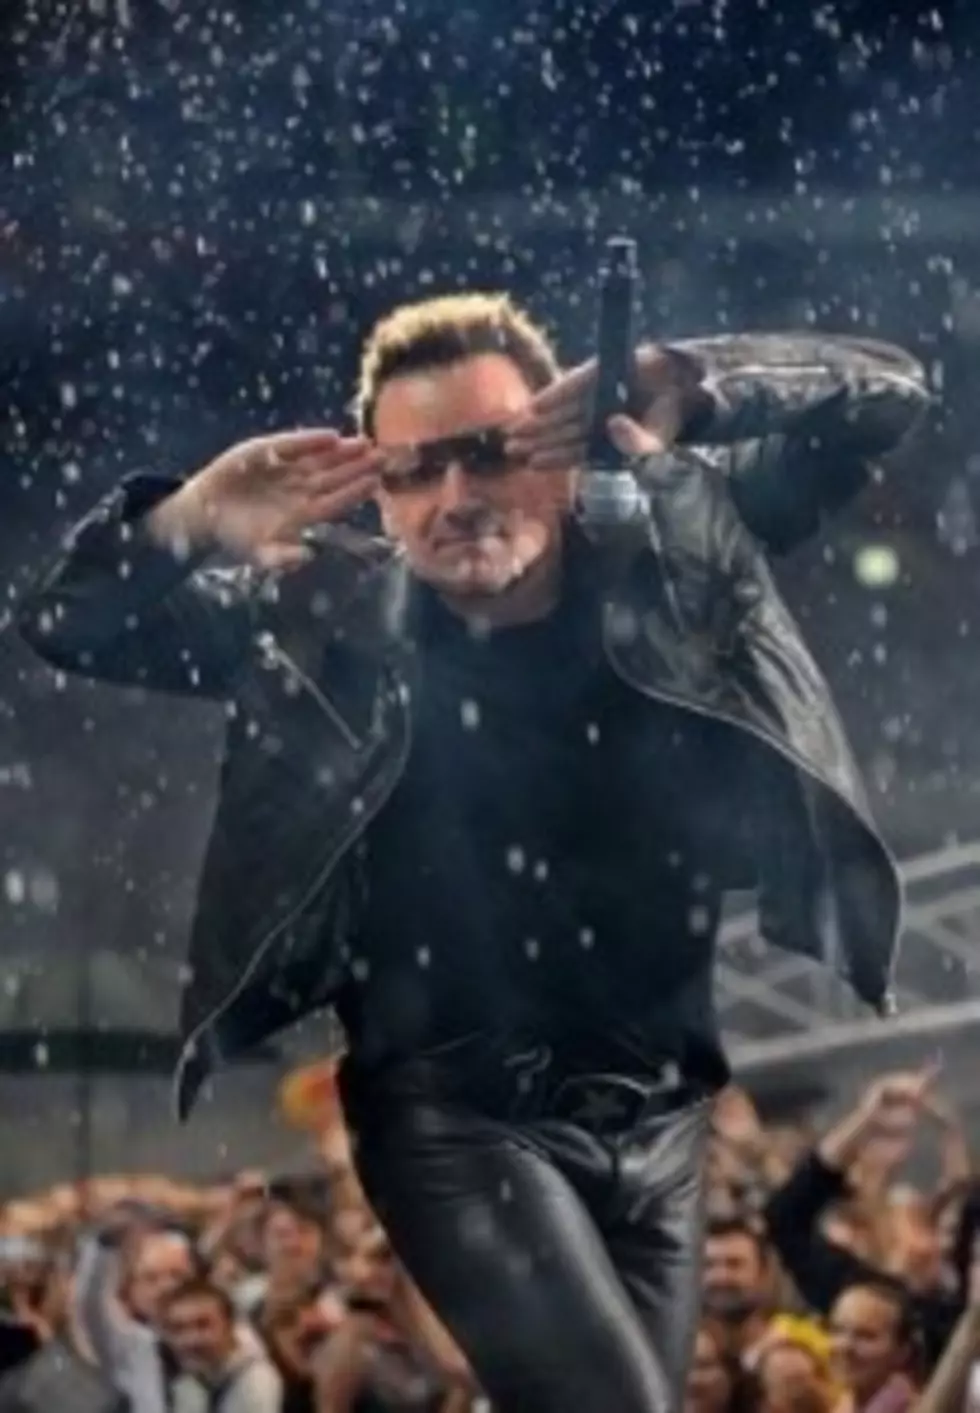 U2 To Release Limited-Edition Vinyl EP Next Month